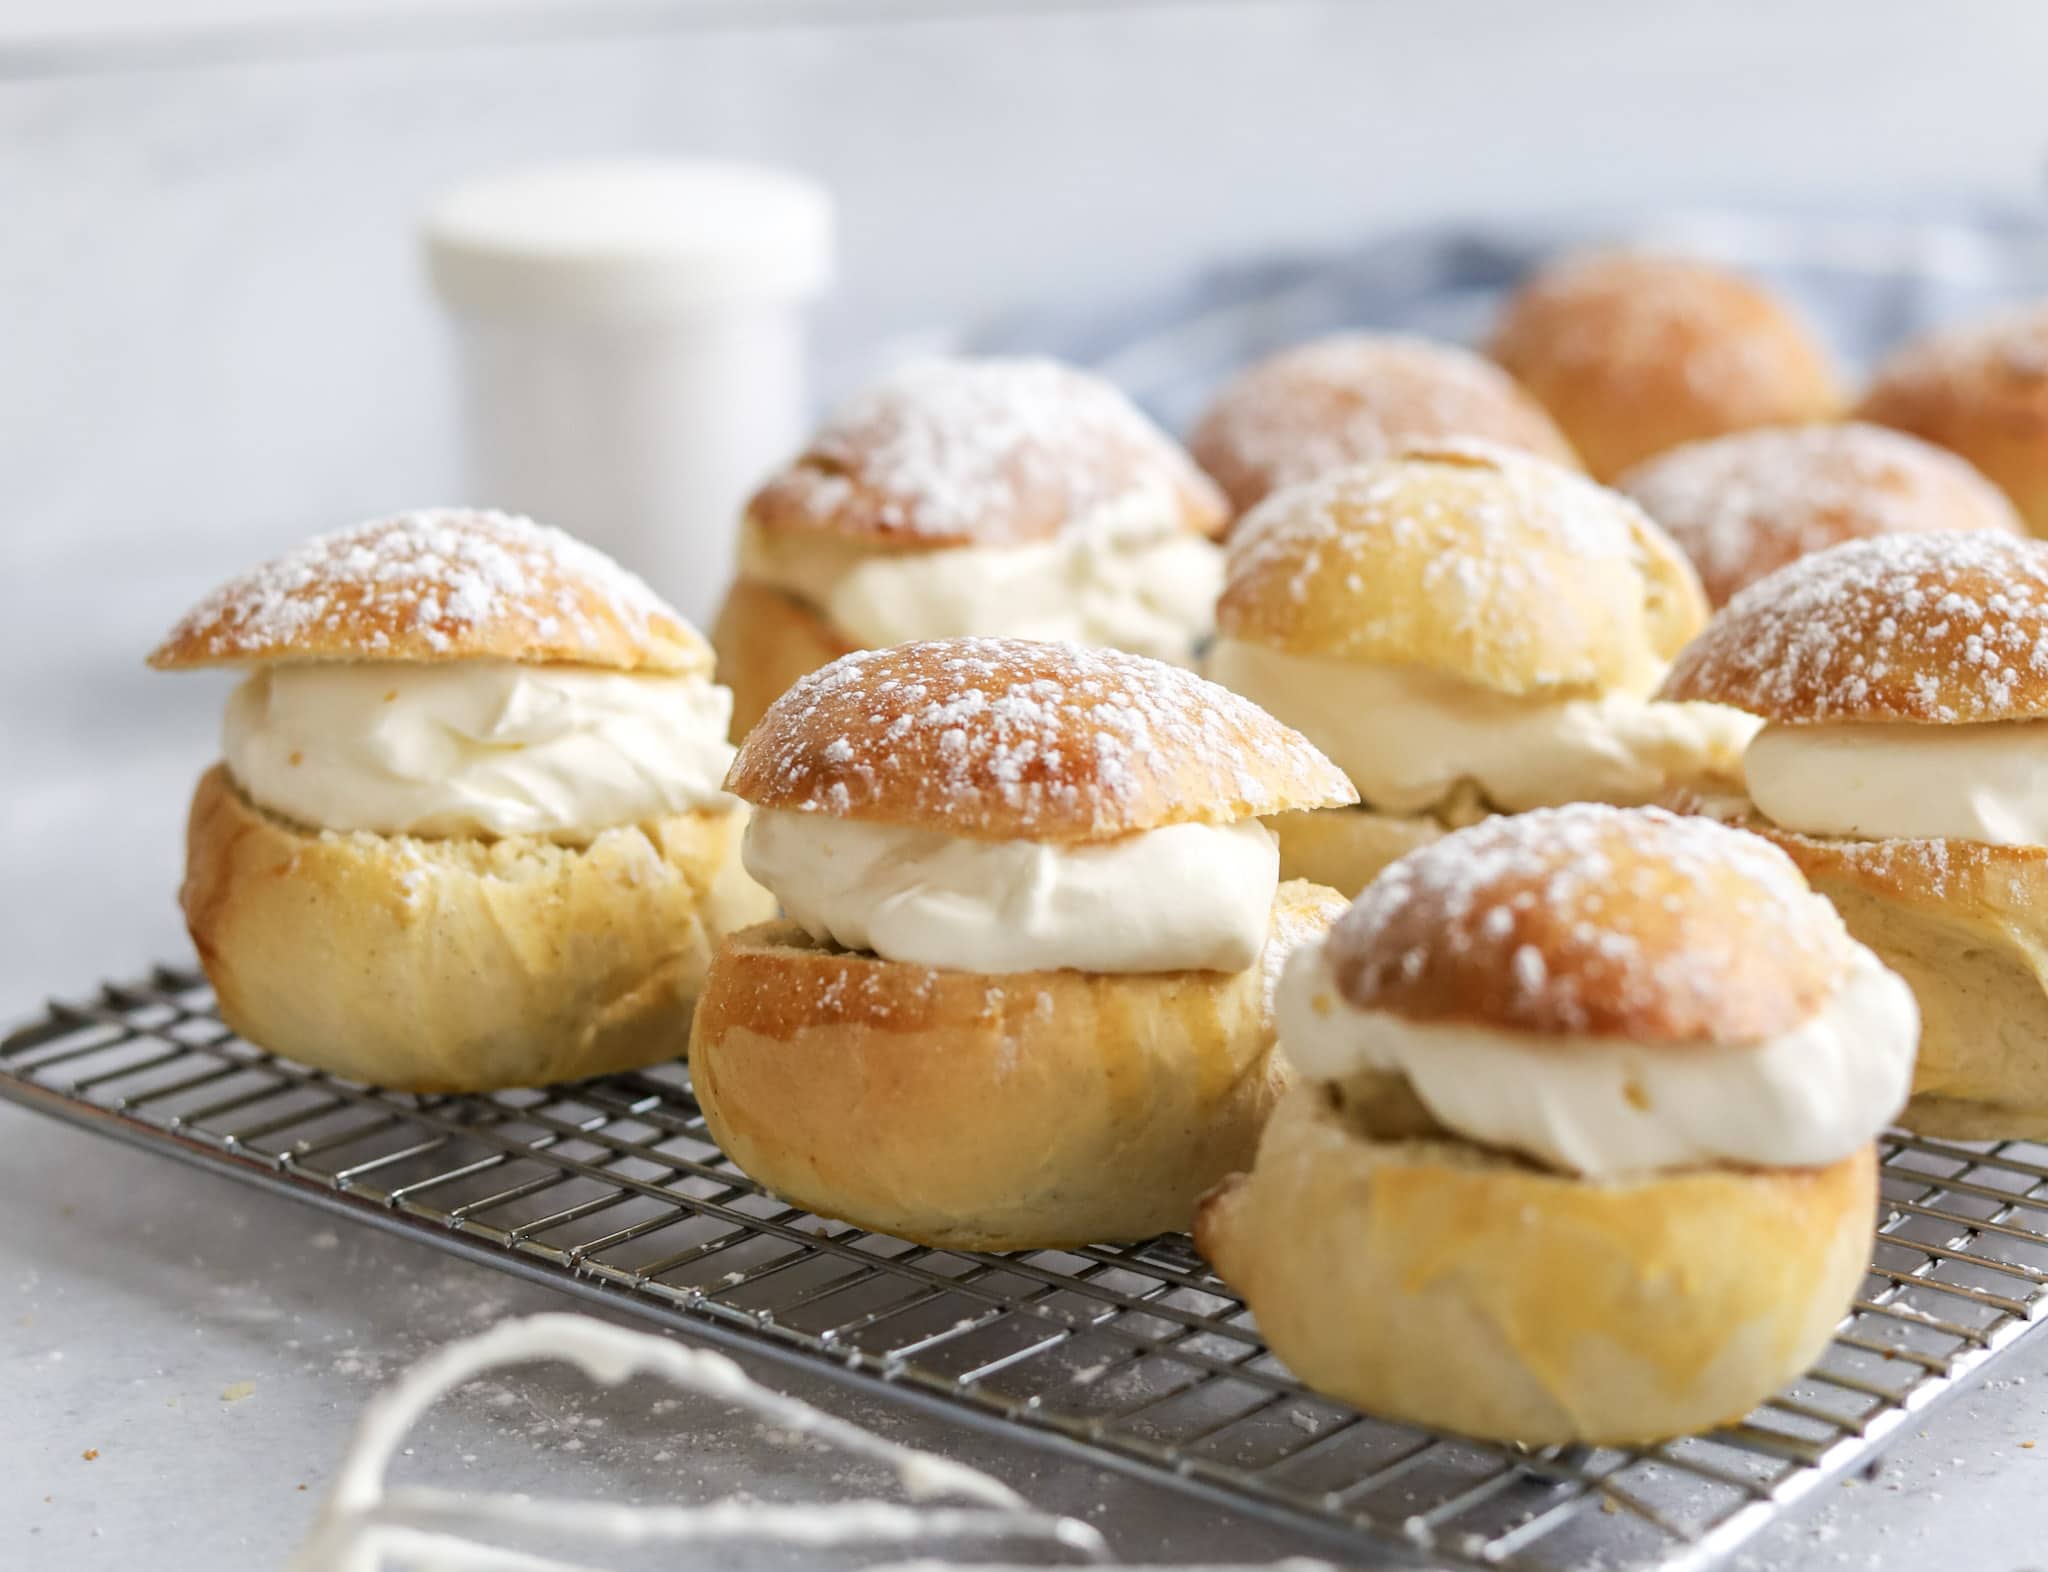 cardamom buns with whipped cream